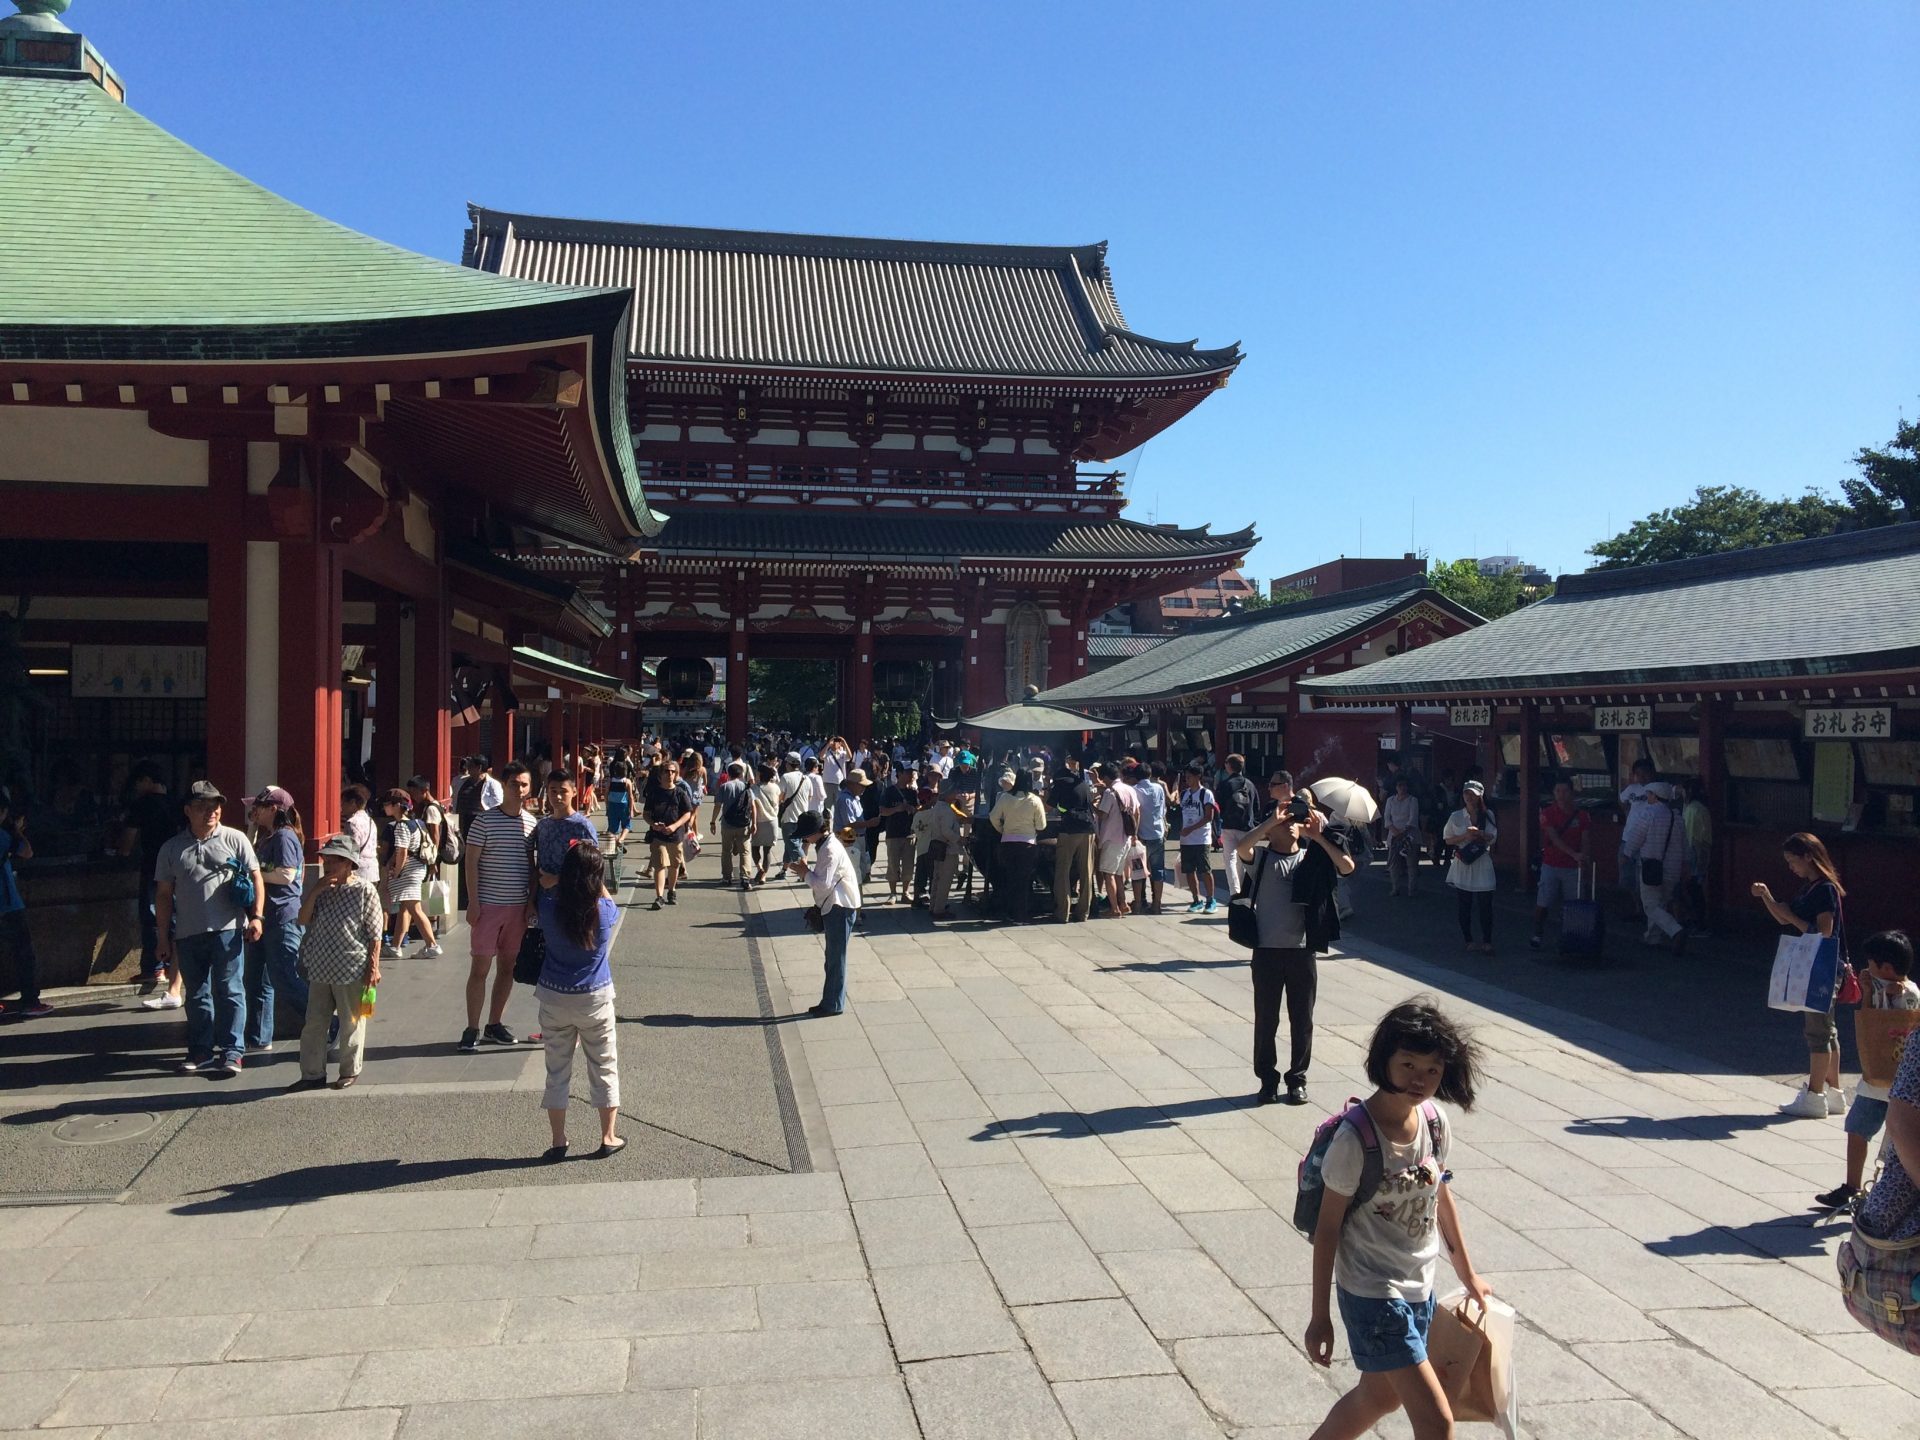 Many shops can be found after enter Sensō-ji temple area through the main gate